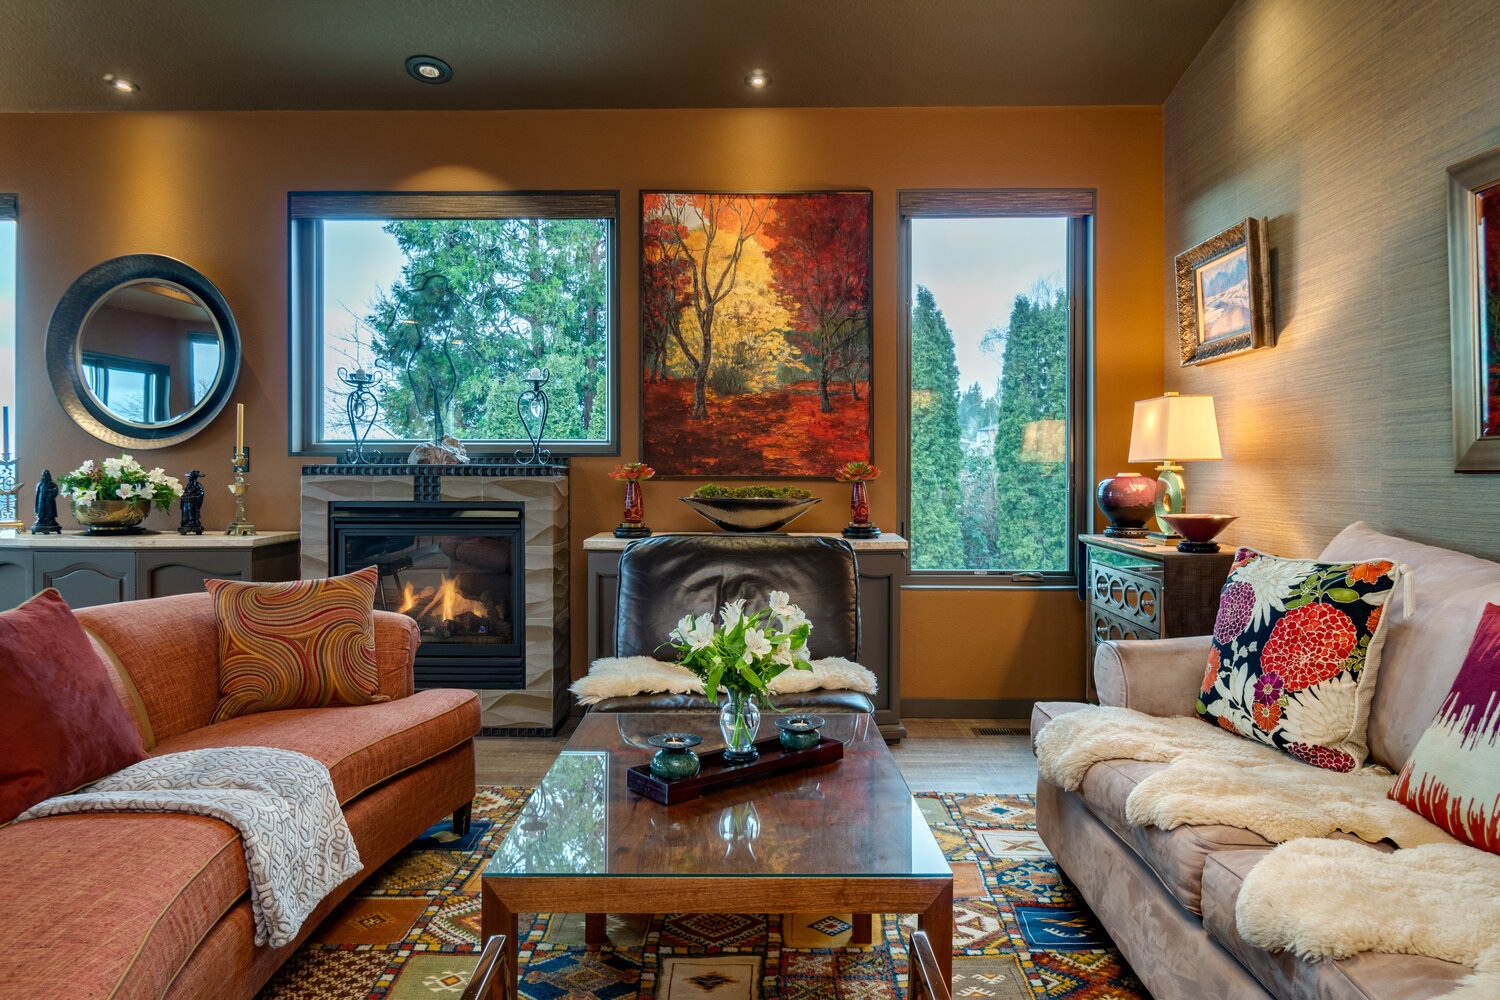 Orange and gold combined with some fuzzy sheep skins can make a space feel warm and soft.